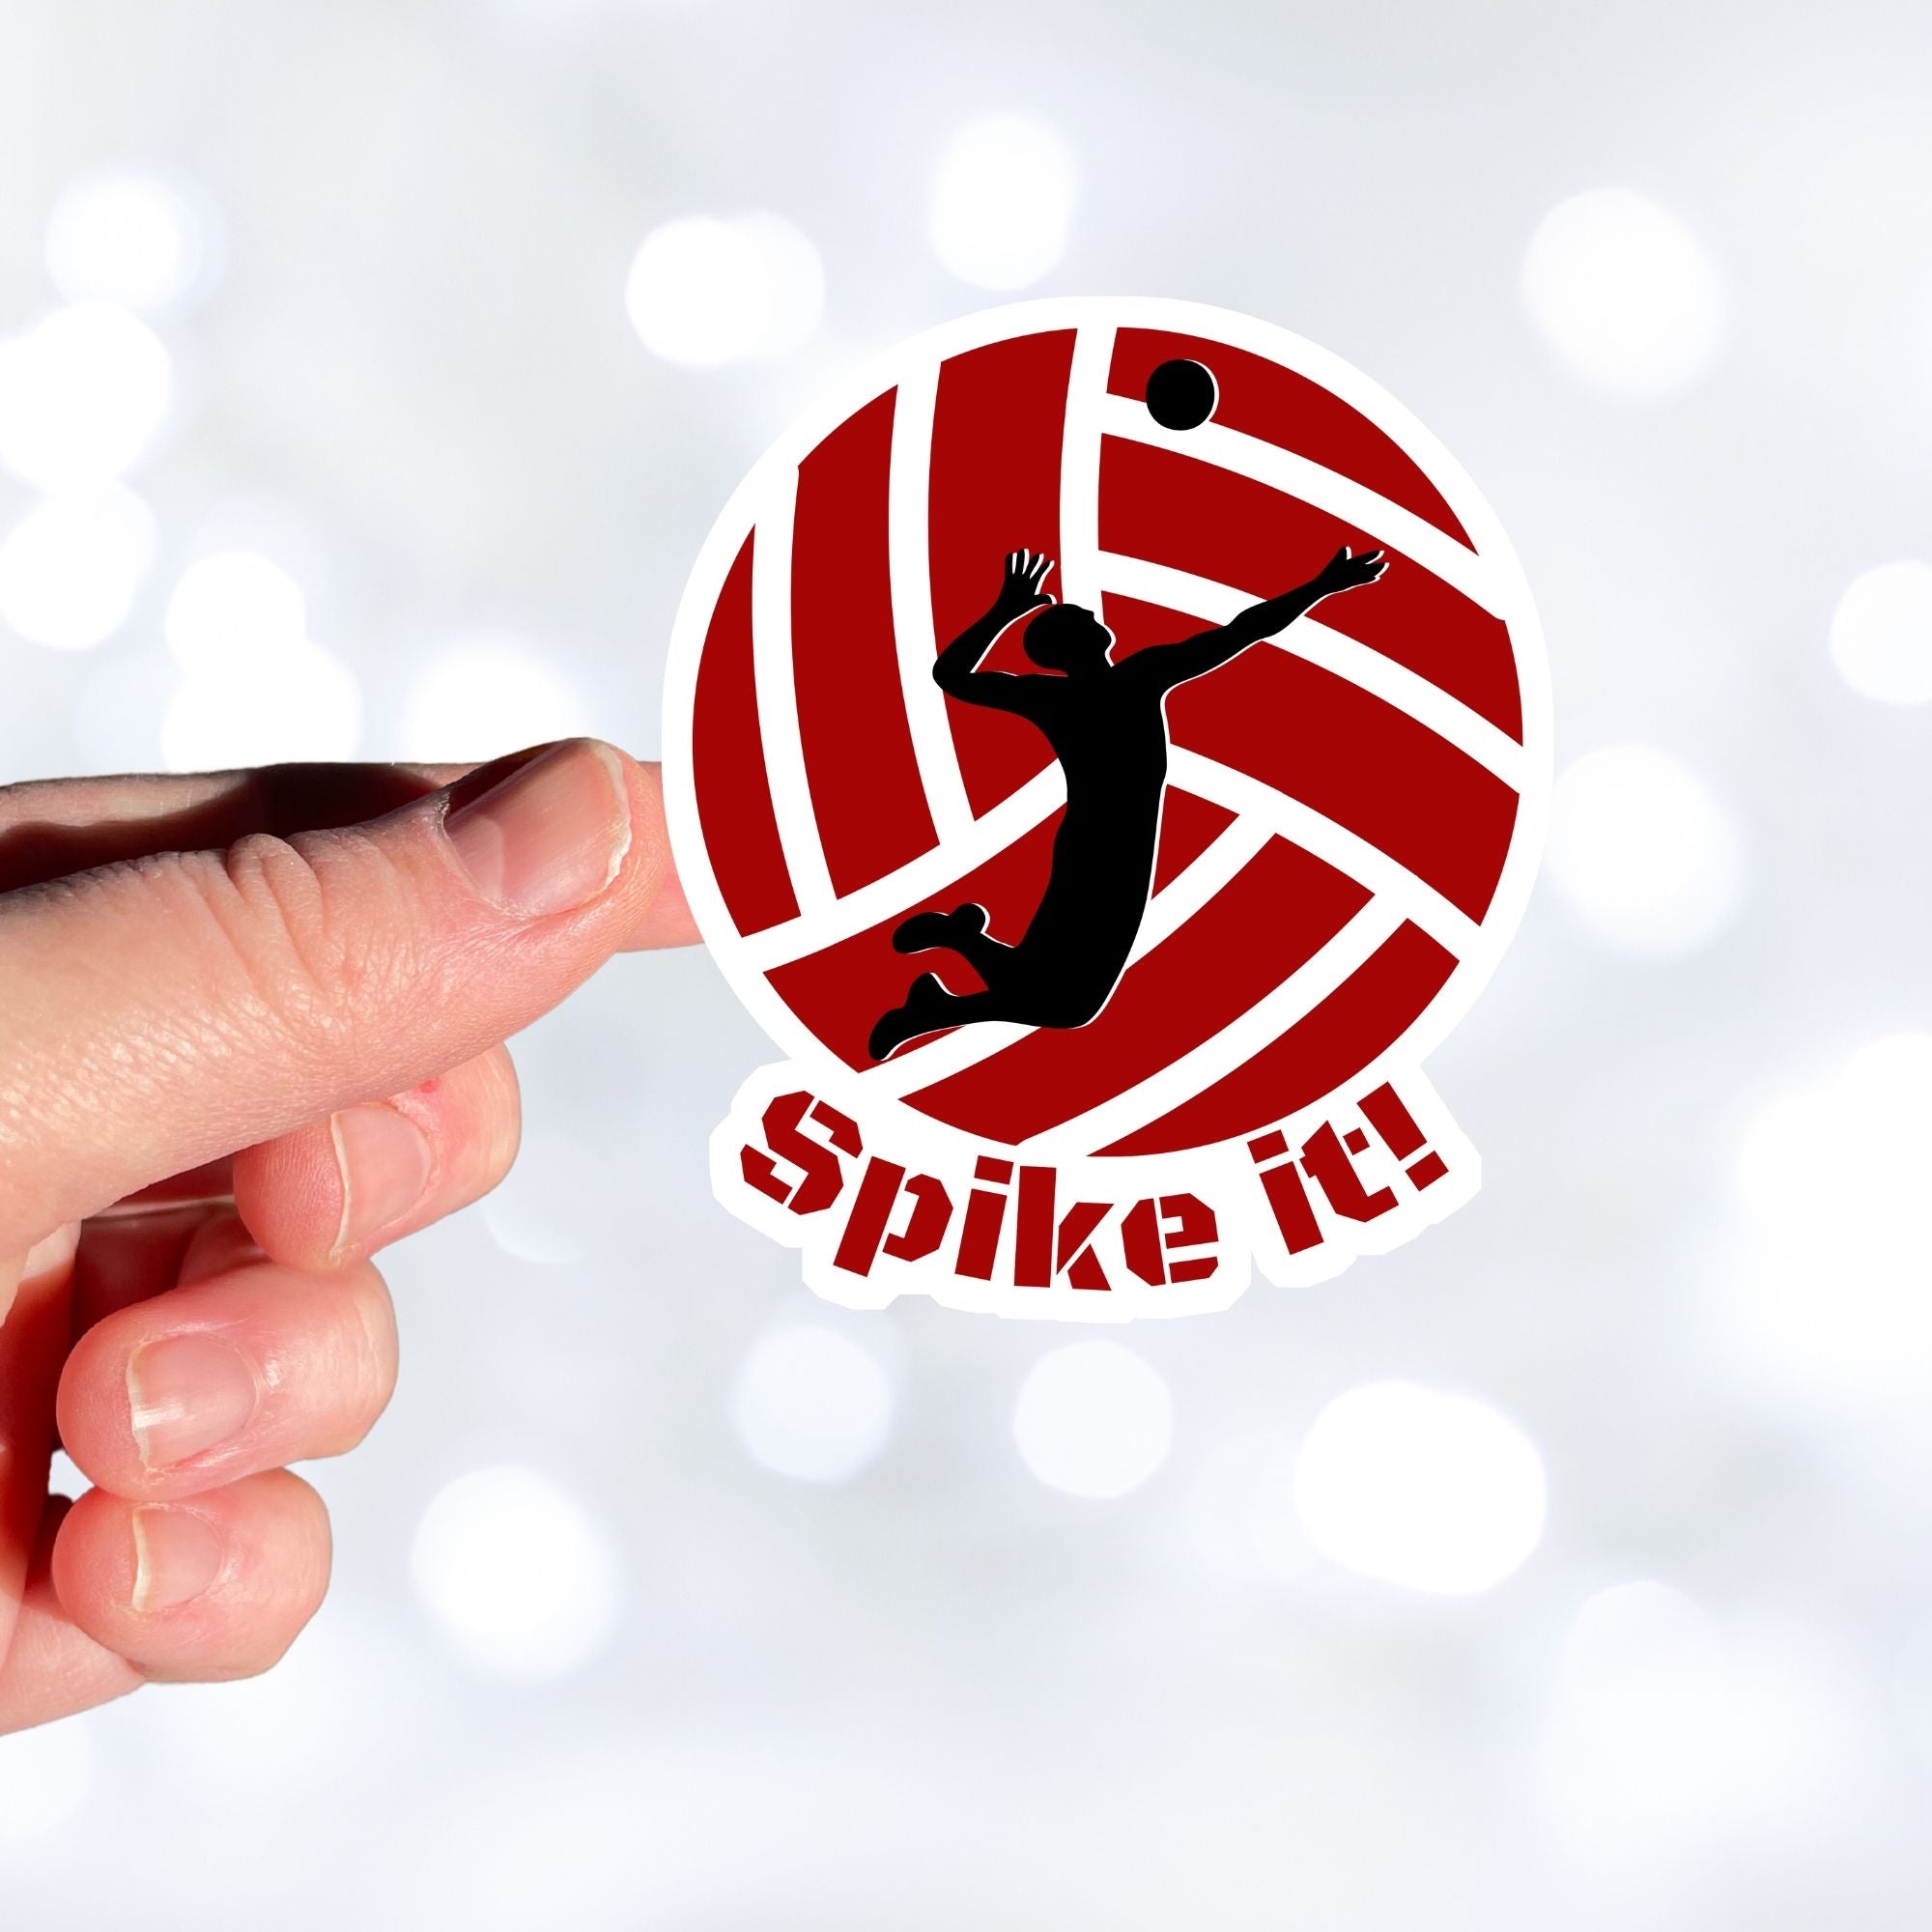 Show your love of volleyball with this individual die-cut sticker! This sticker shows the silhouette of a player about to spike the ball, on a maroon and white volleyball background, with the words "Spike it!" below. This image shows a hand holding the volleyball sticker.